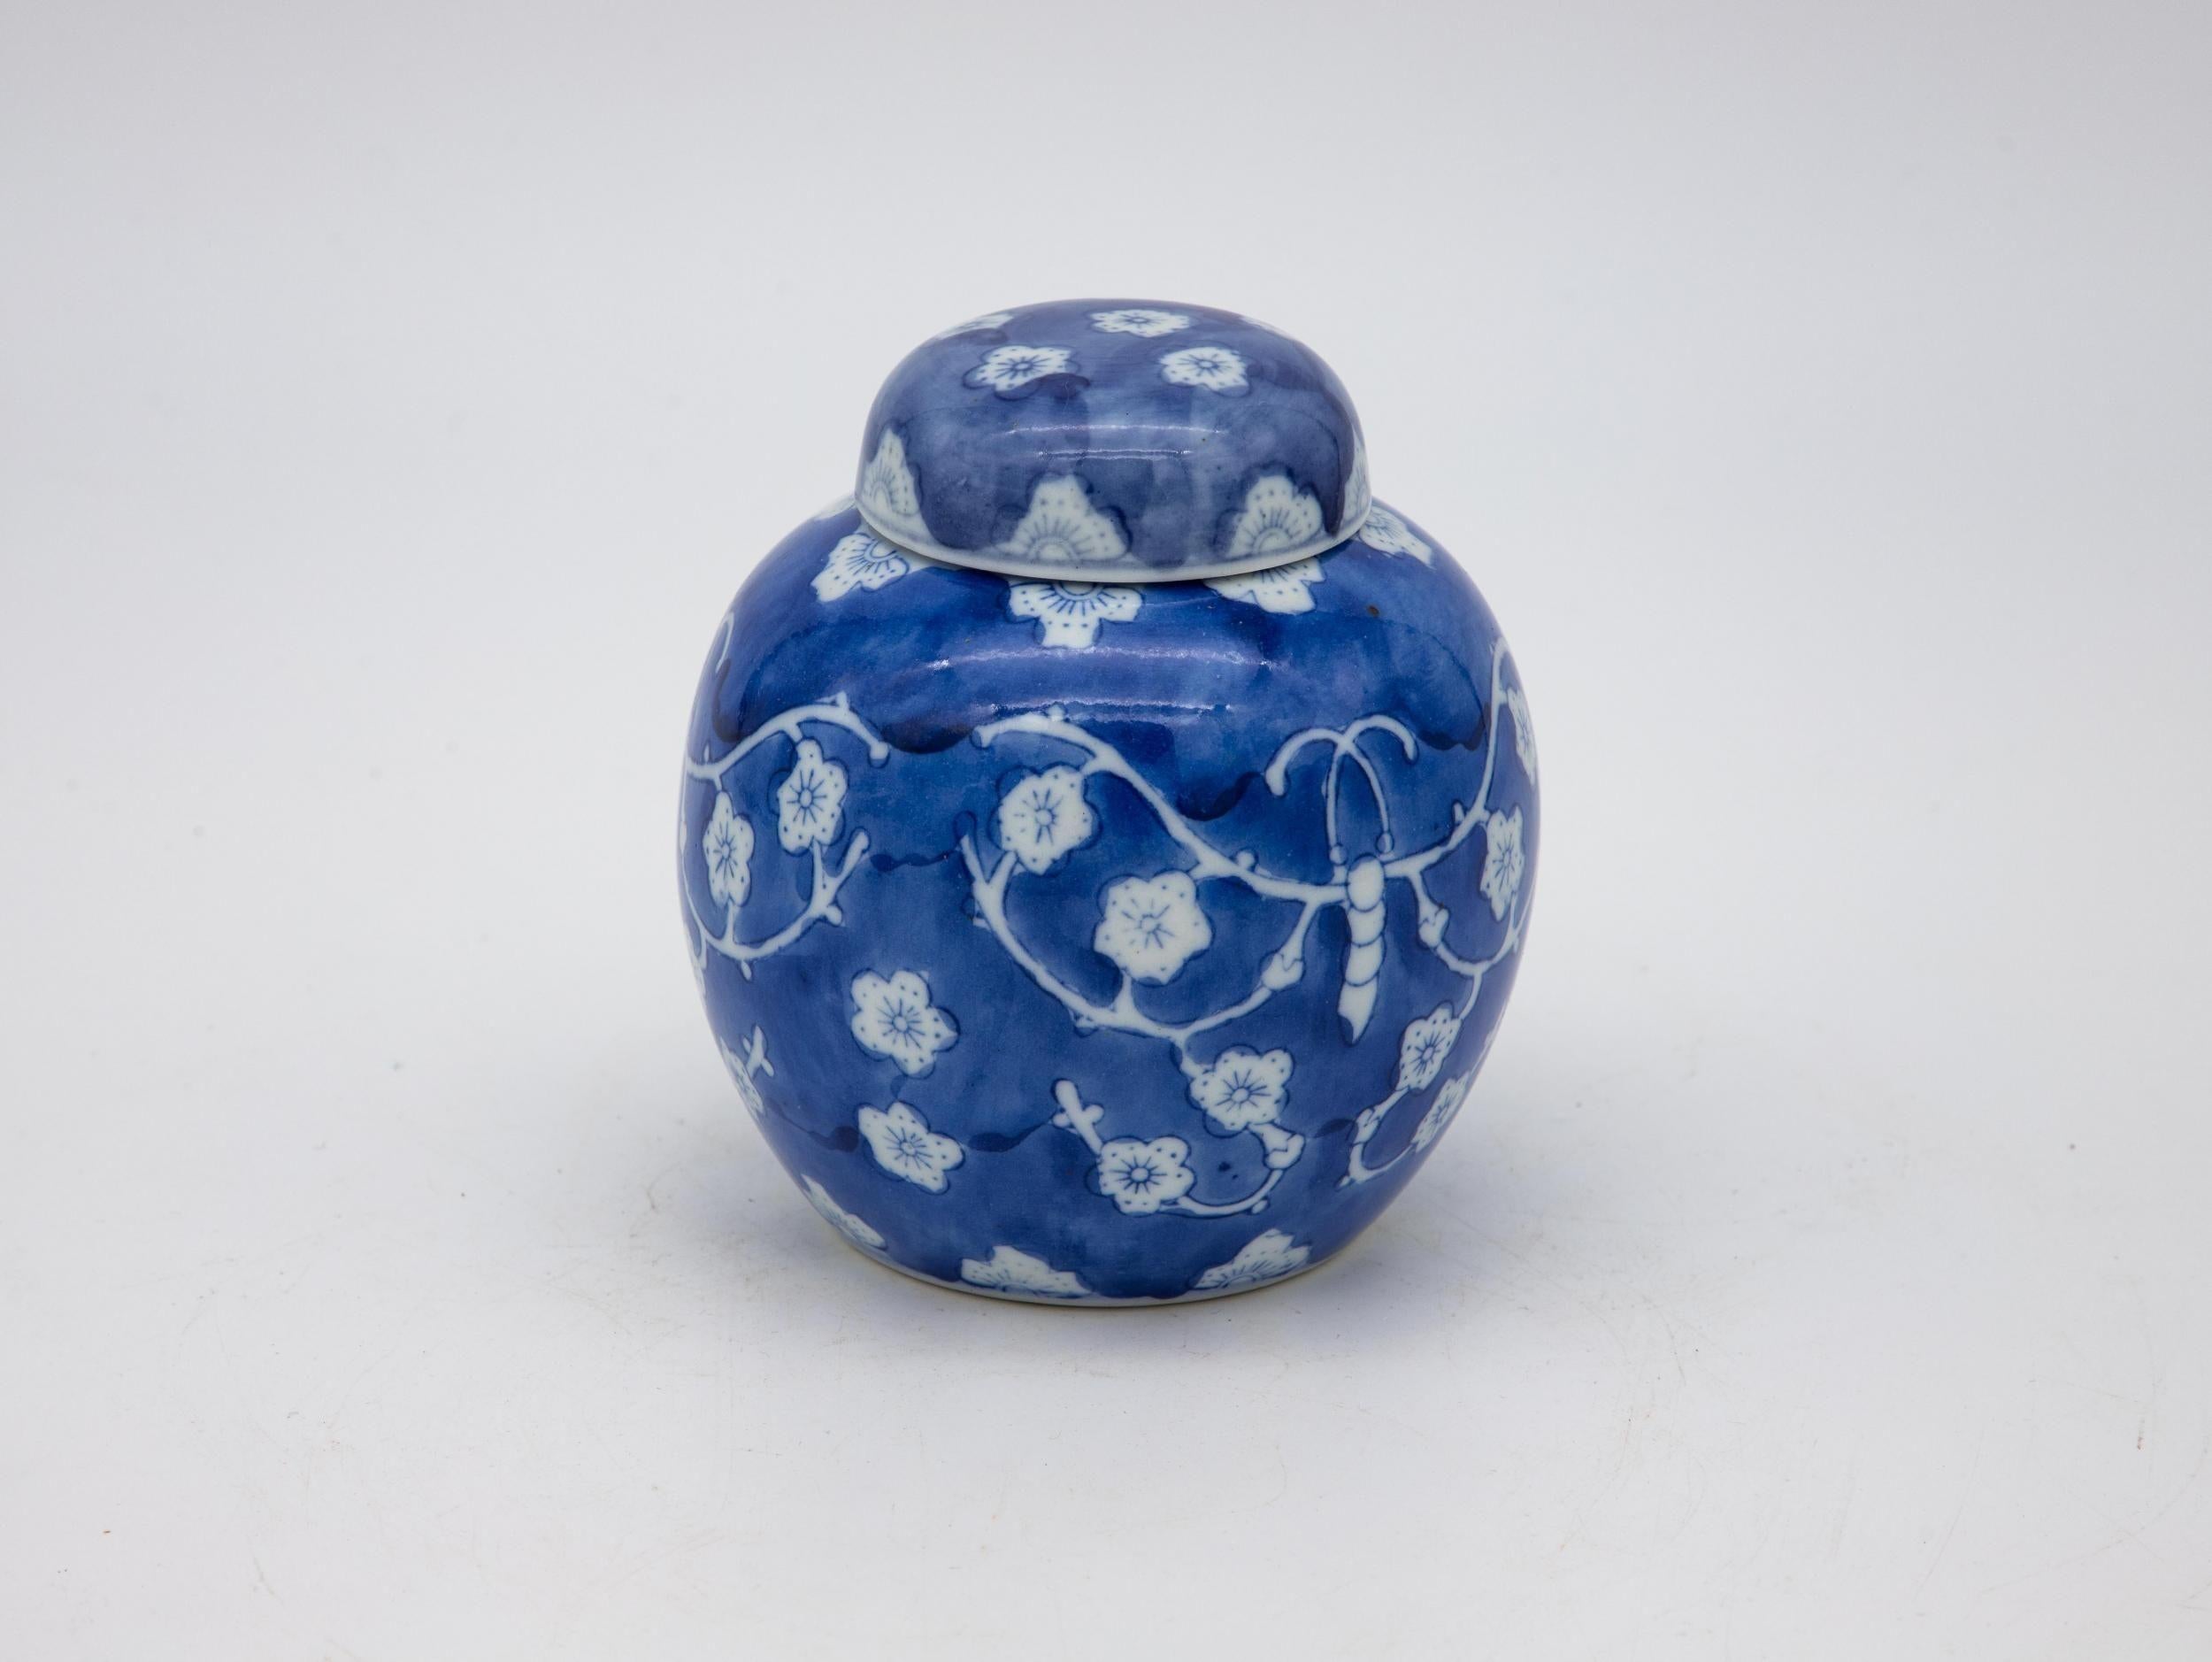 A trio of small blue and white Chinoiserie ginger jars. Two of the jars feature a cherry blossom pattern and one features a lotus blossom. The lids are removable and one has been repaired.